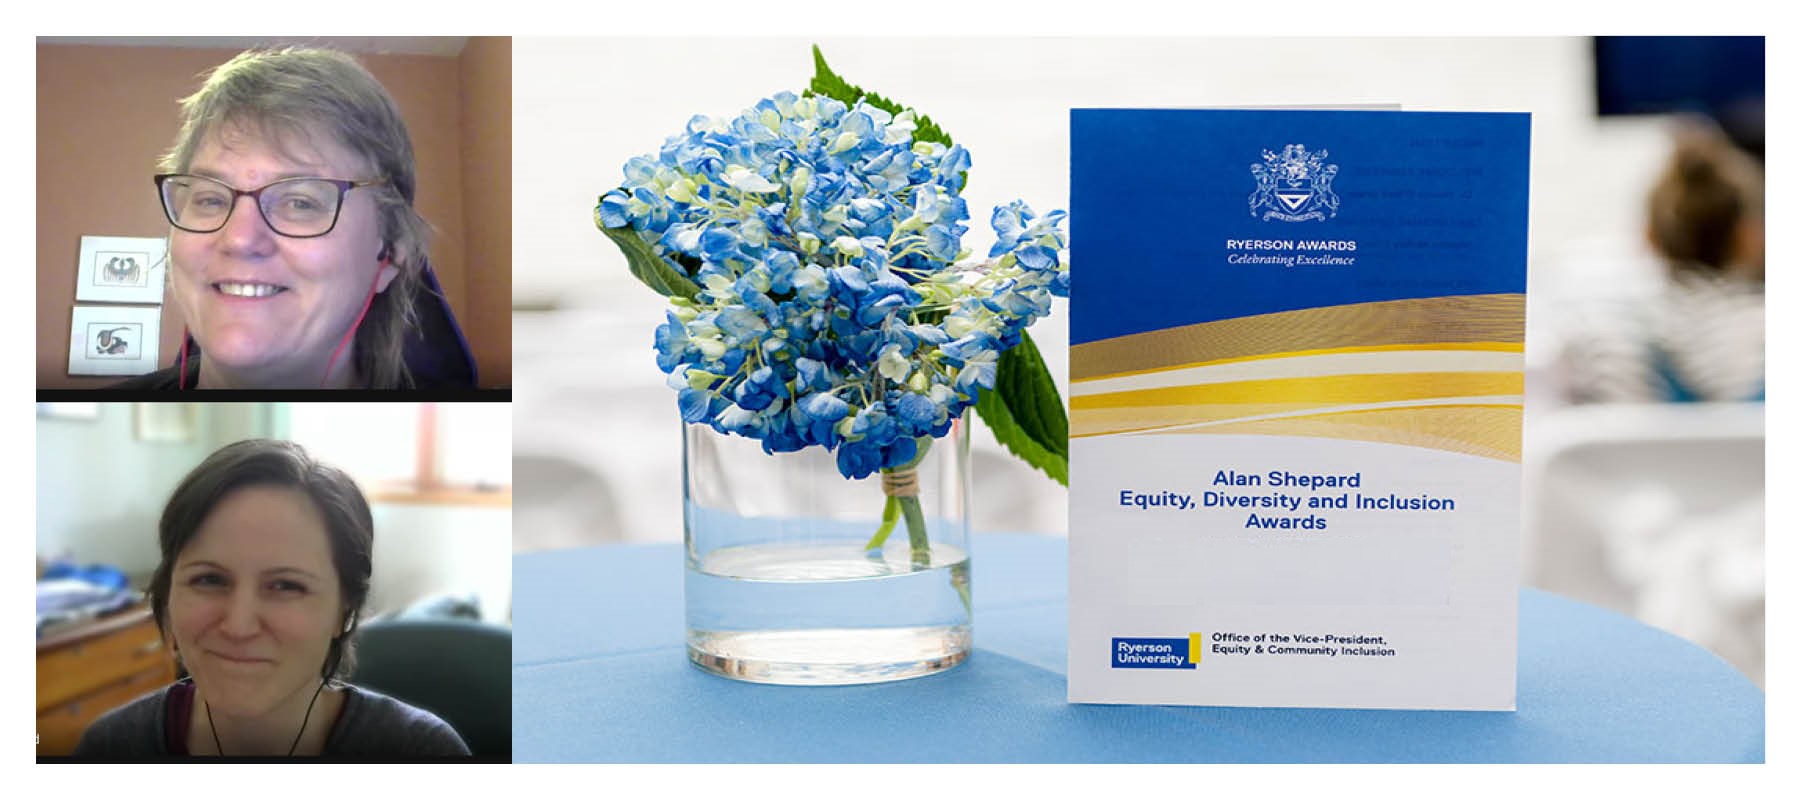 Dr. Fels and Ms Whitfield are smiling from their screens next to a blue flower and Ryerson award card for the Alan Shepard Award Ceremony